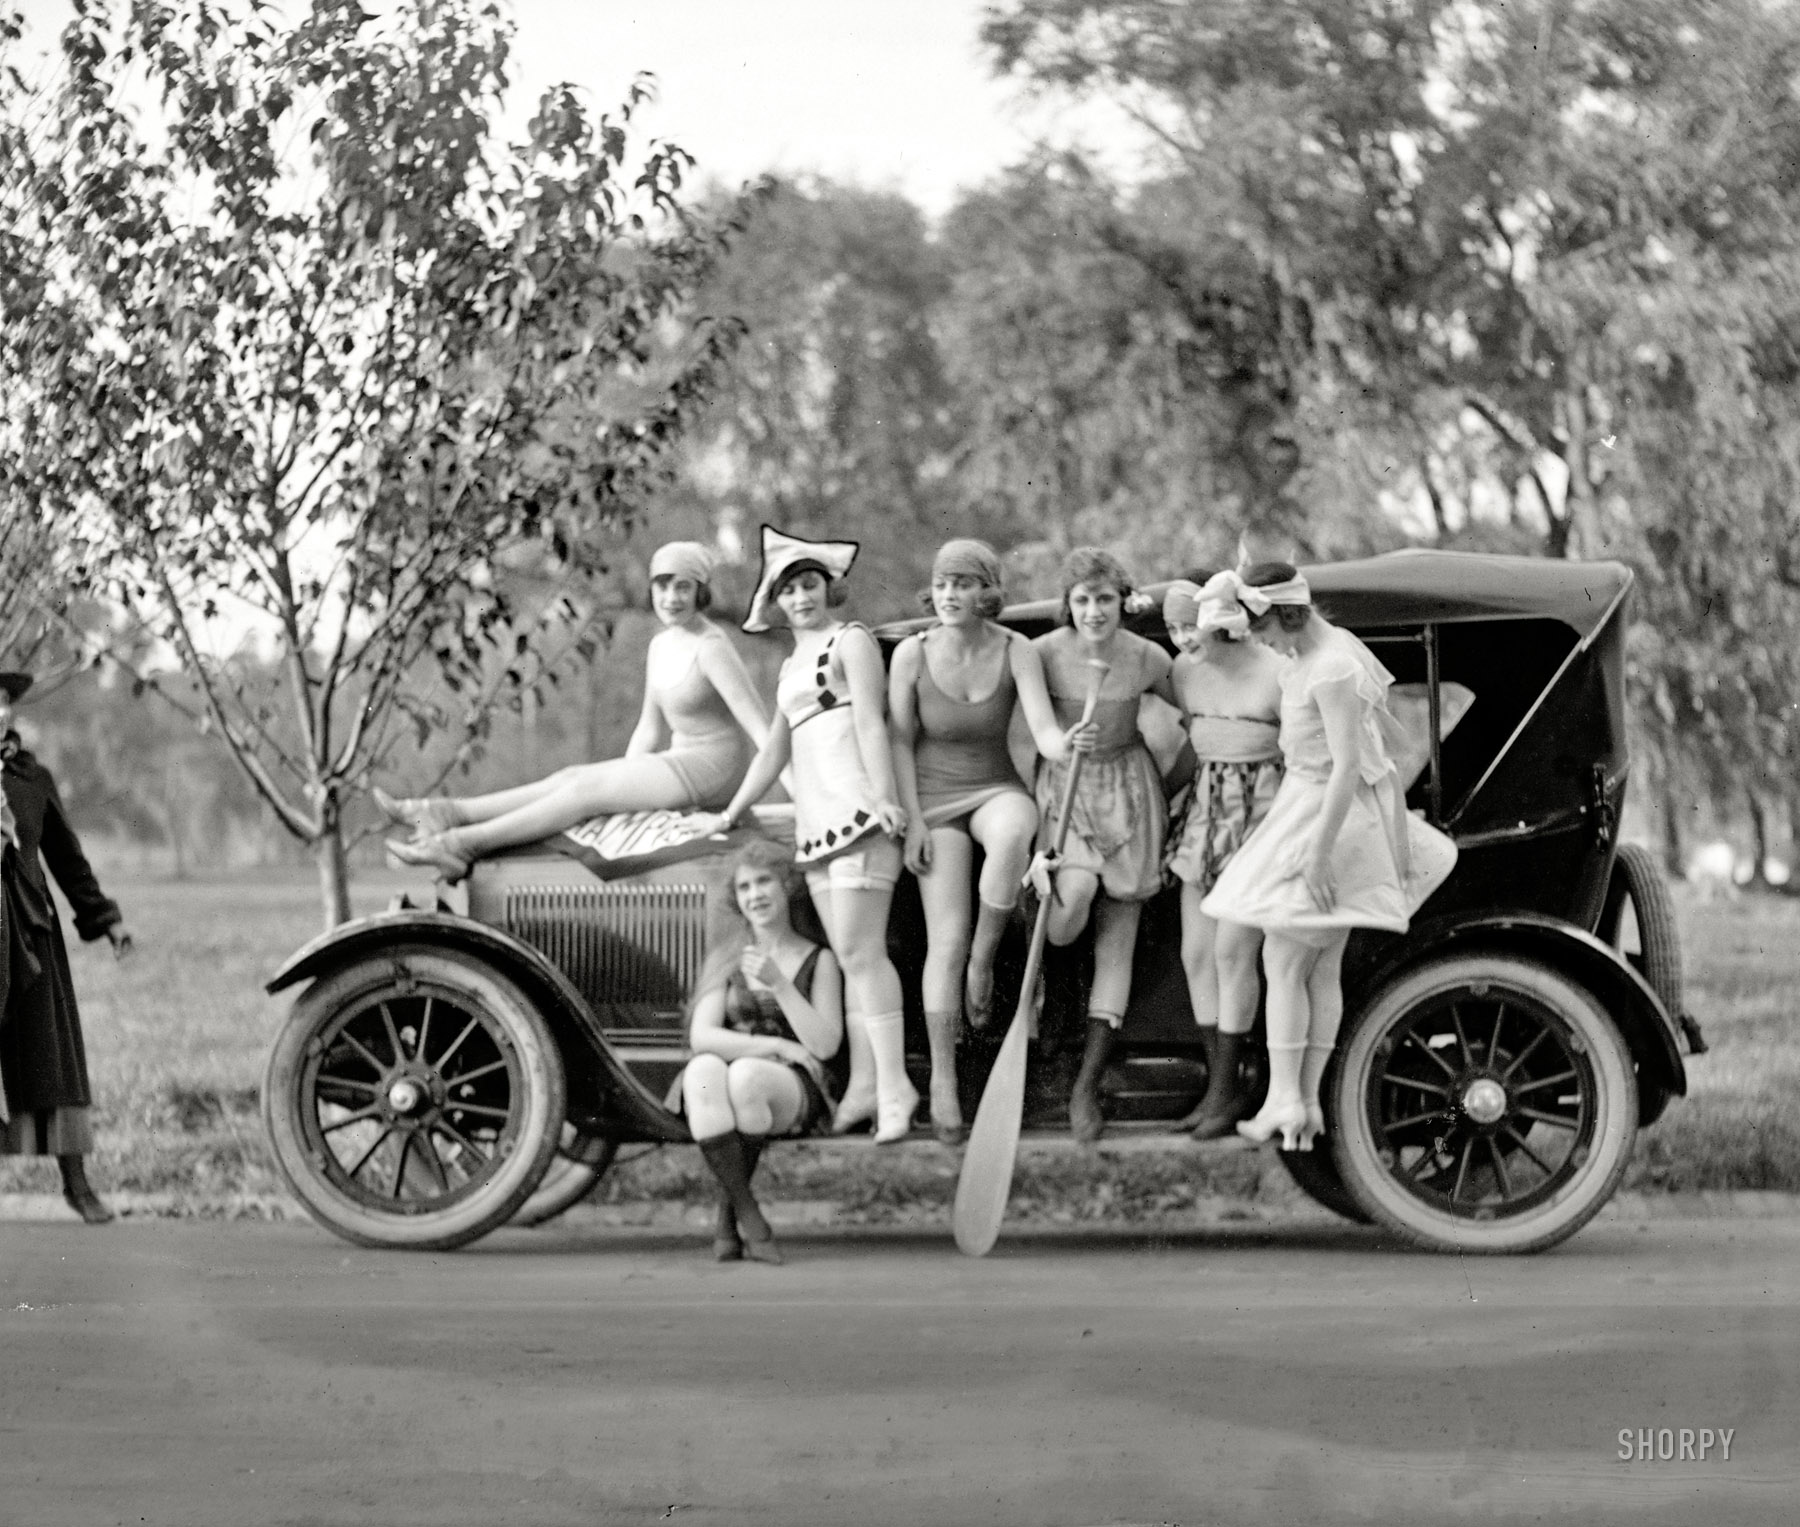 Washington, D.C., circa 1919. "Sennett girls." Producer Mack Sennett's comedy reels featured a bevy of "bathing beauties," among them Marvel Rea, seen here in the harlequin costume. National Photo Company. View full size.